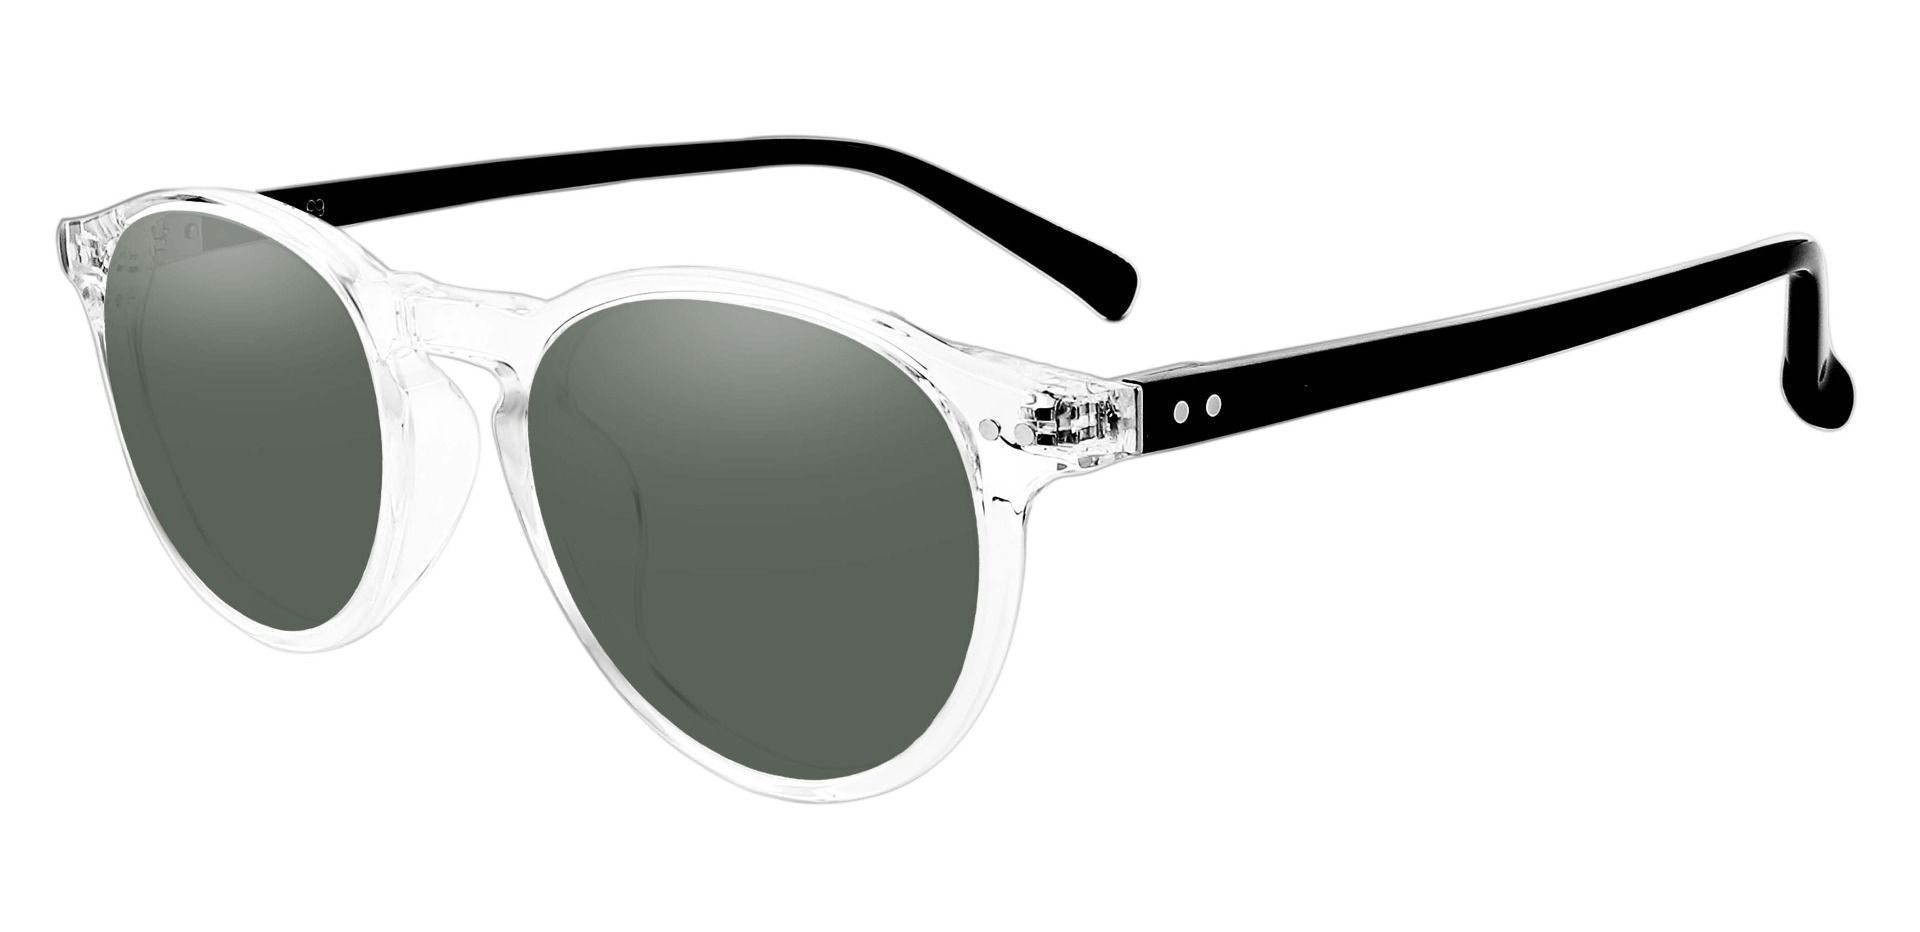 Monarch Oval Progressive Sunglasses - Clear Frame With Green Lenses